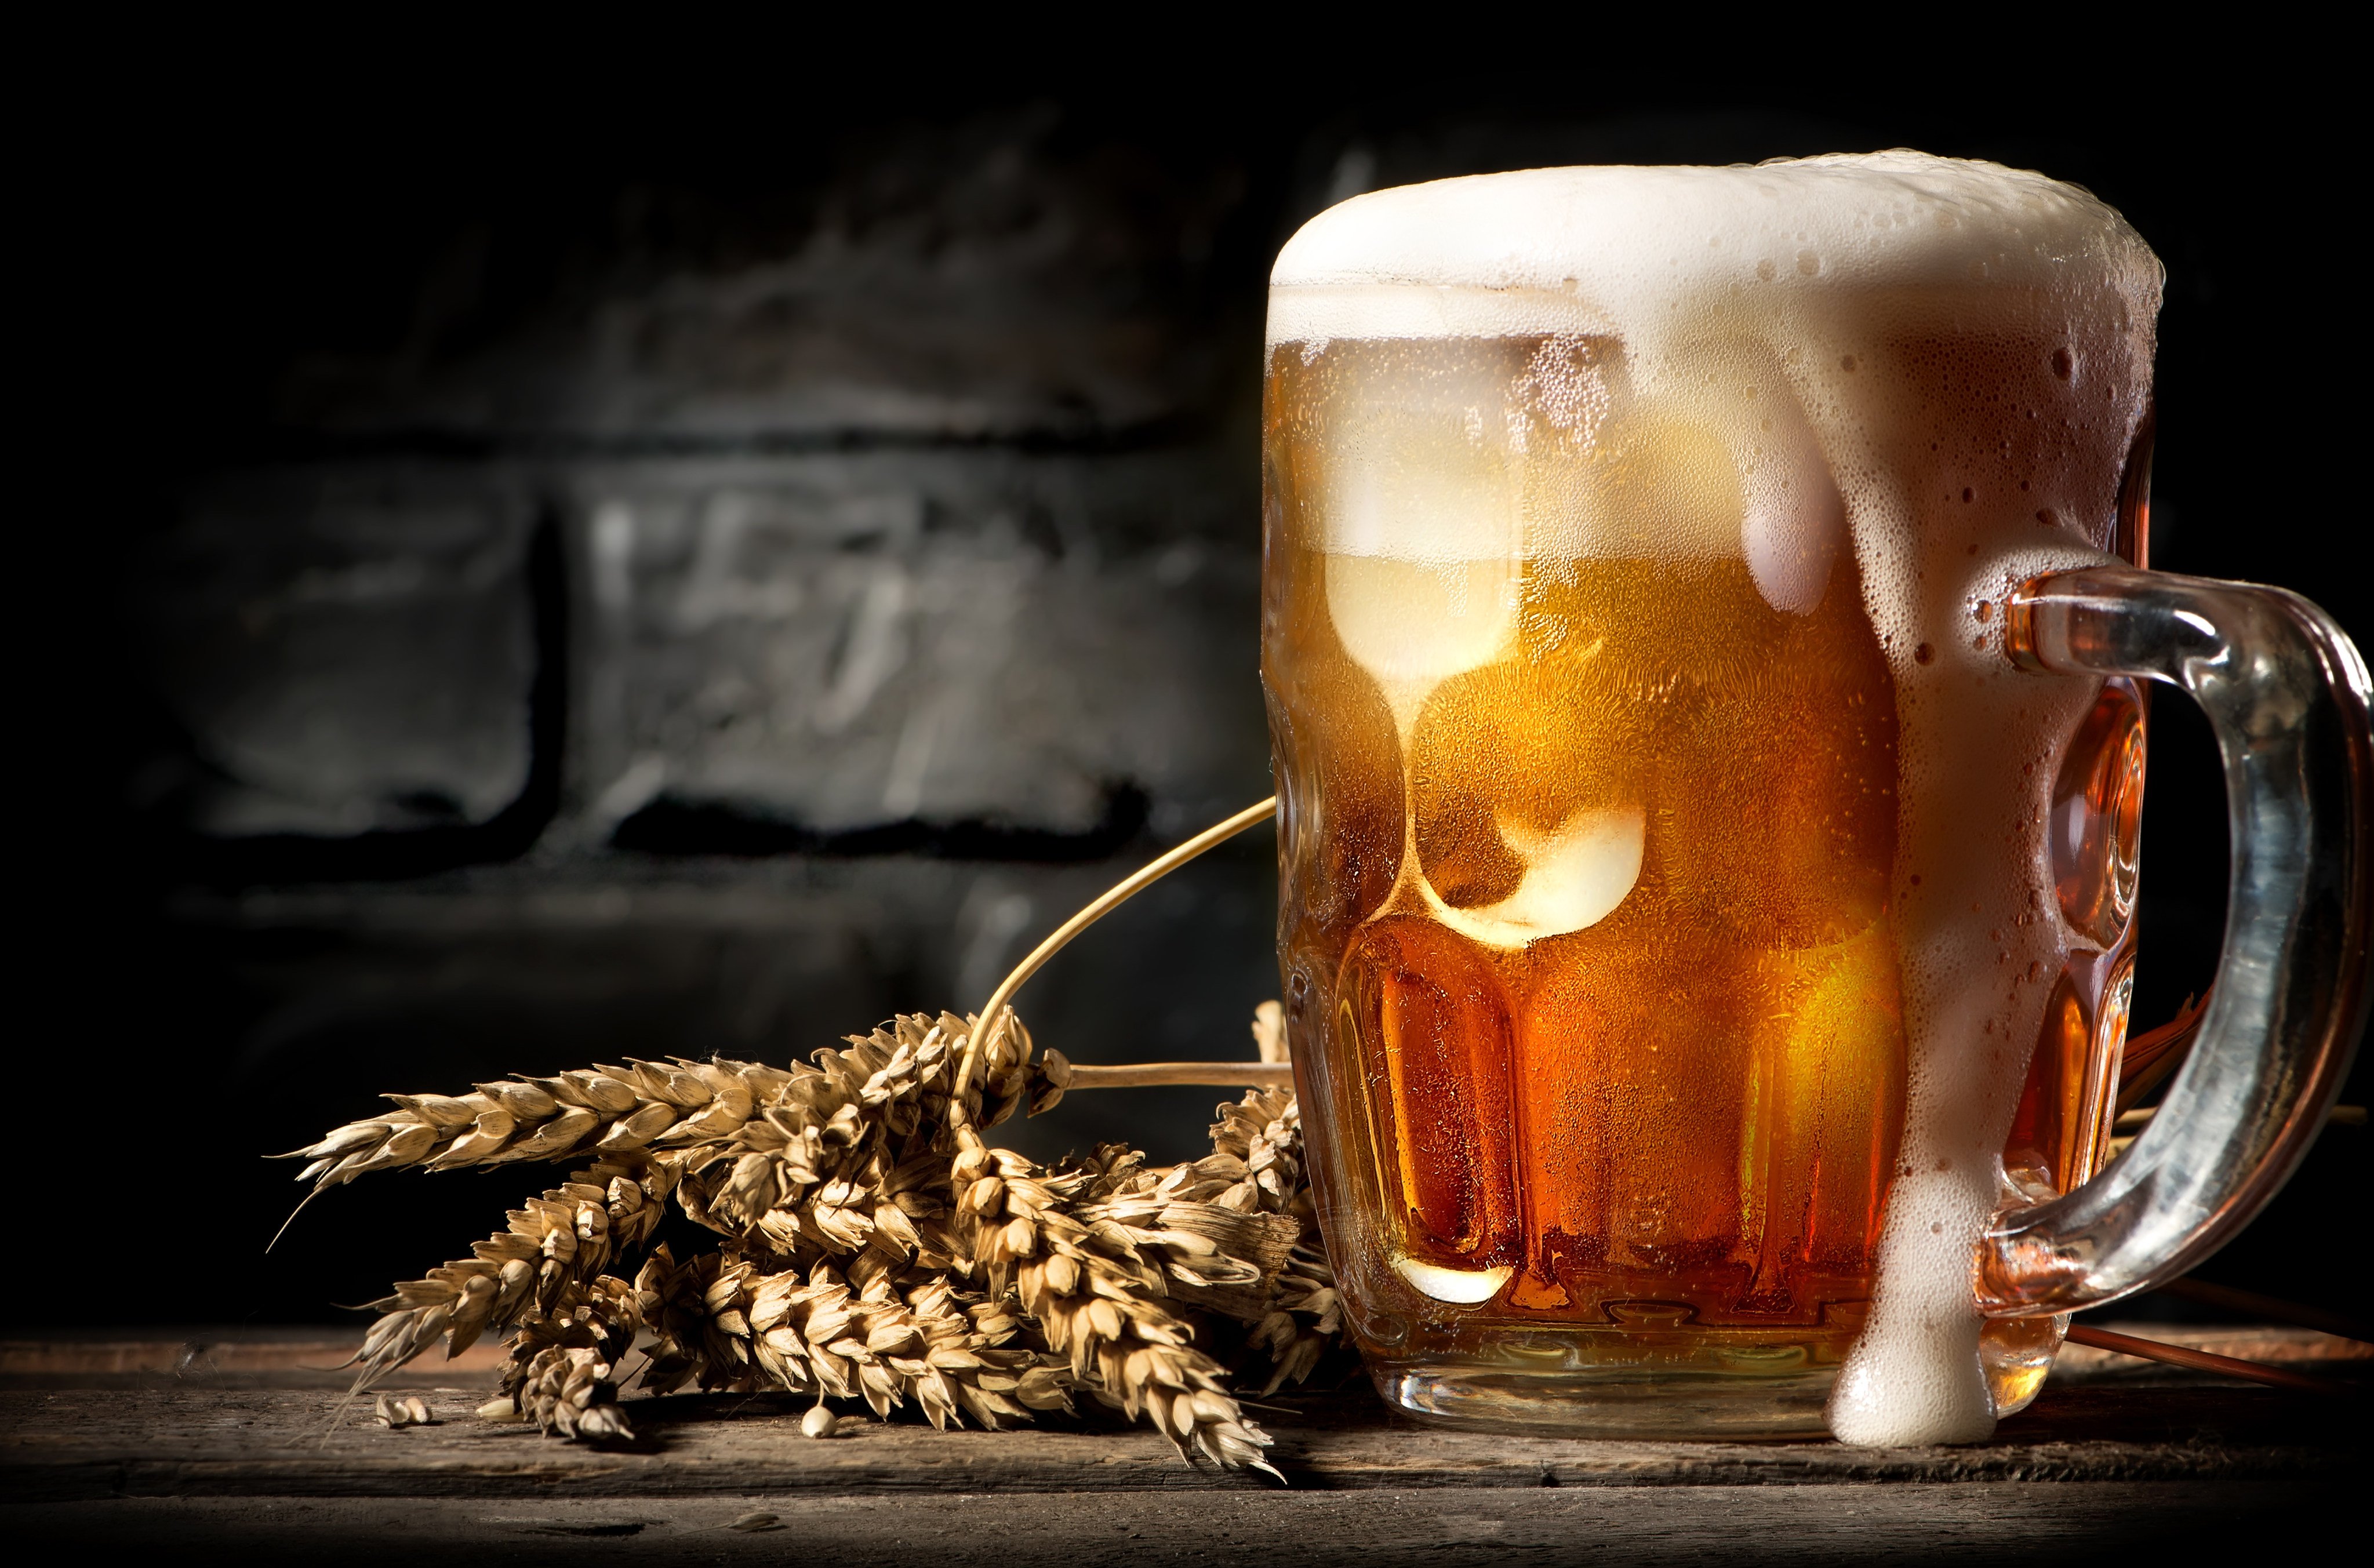 Auto-brewery syndrome causes carbohydrates in the stomach to be fermented, increasing ethanol levels in the blood  Photo: Shutterstock 